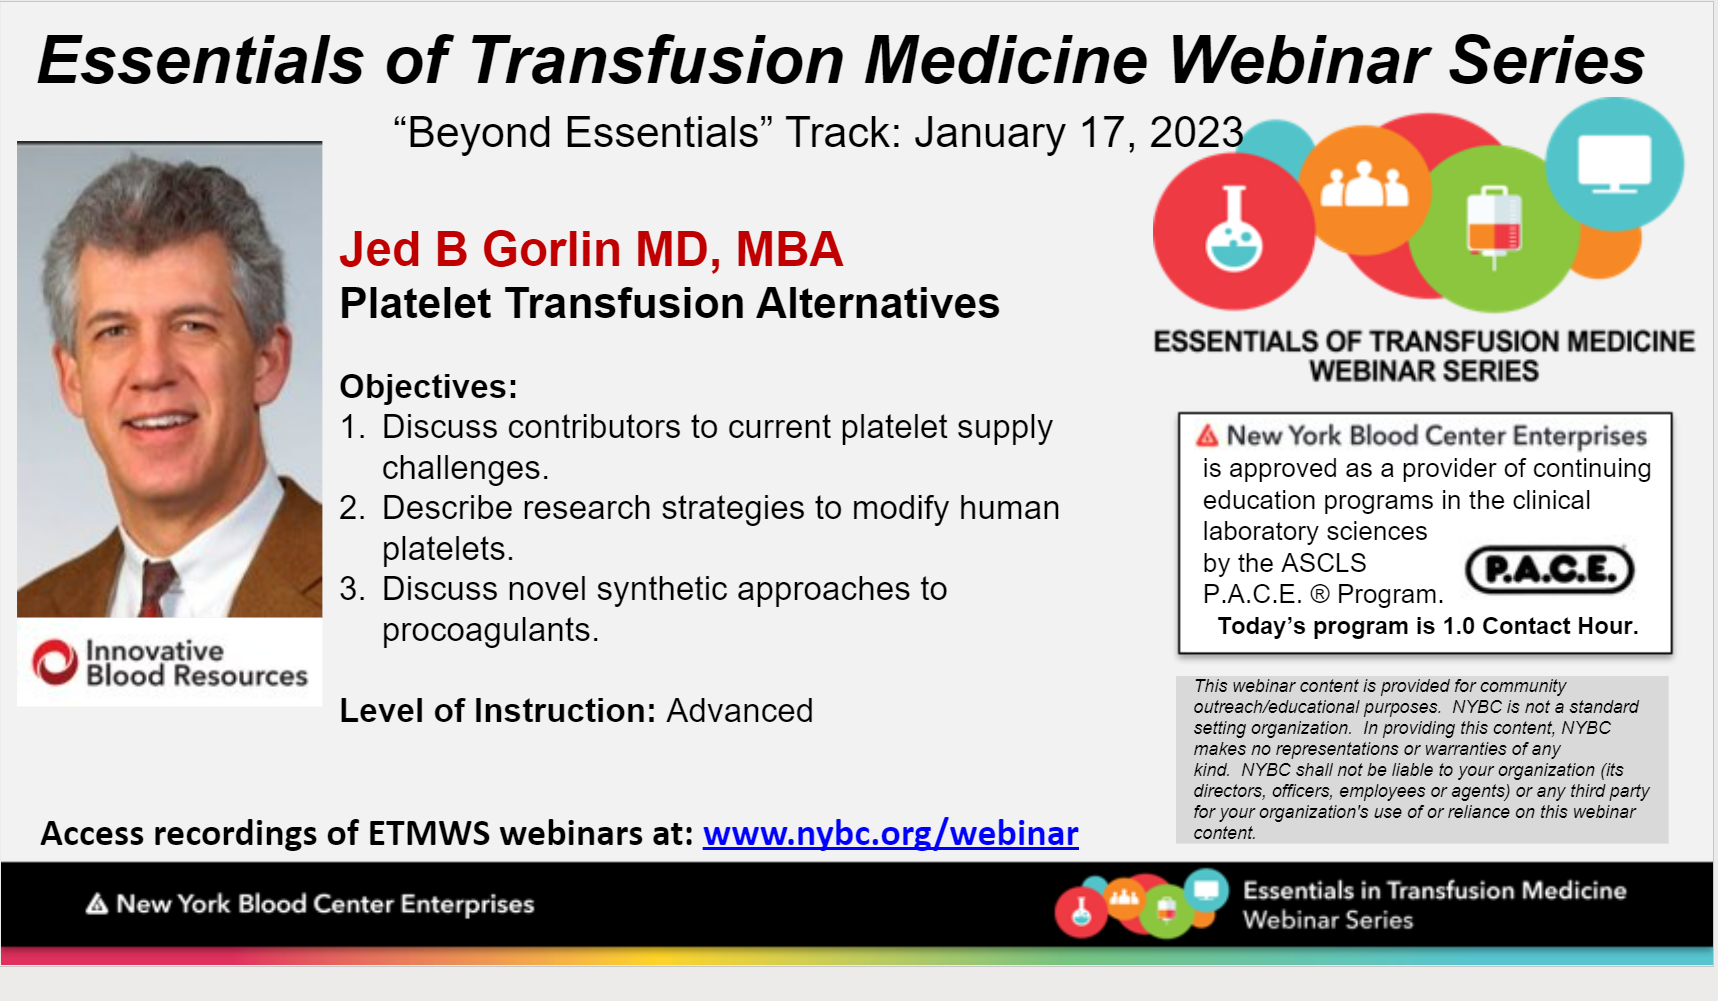 Slide of Essentials of Transfusion Medicine Webinar Series, Beyond Essentials Track: Platelet Transfusion Alternatives, presented by Jed Gorlin, on January 17, 2023.